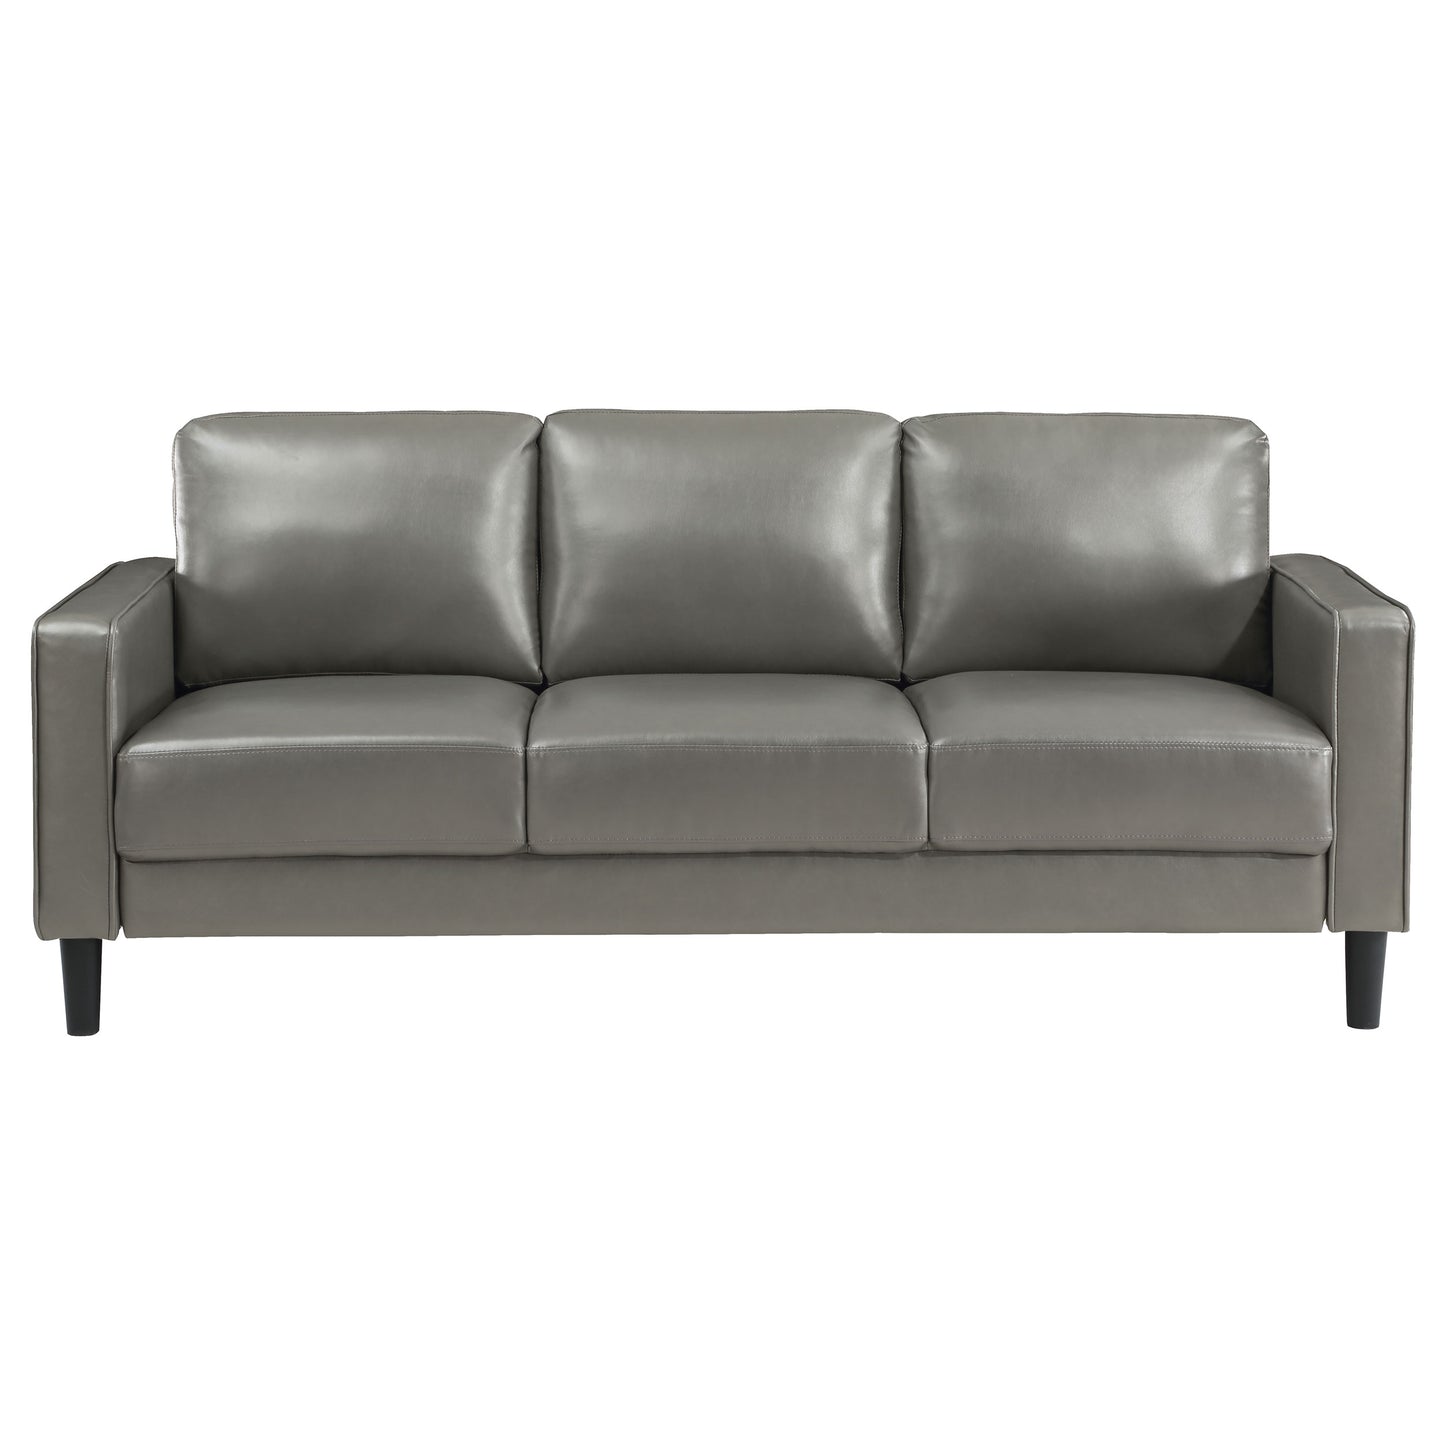 Ruth 3-piece Upholstered Track Arm Faux Leather Sofa Set Grey